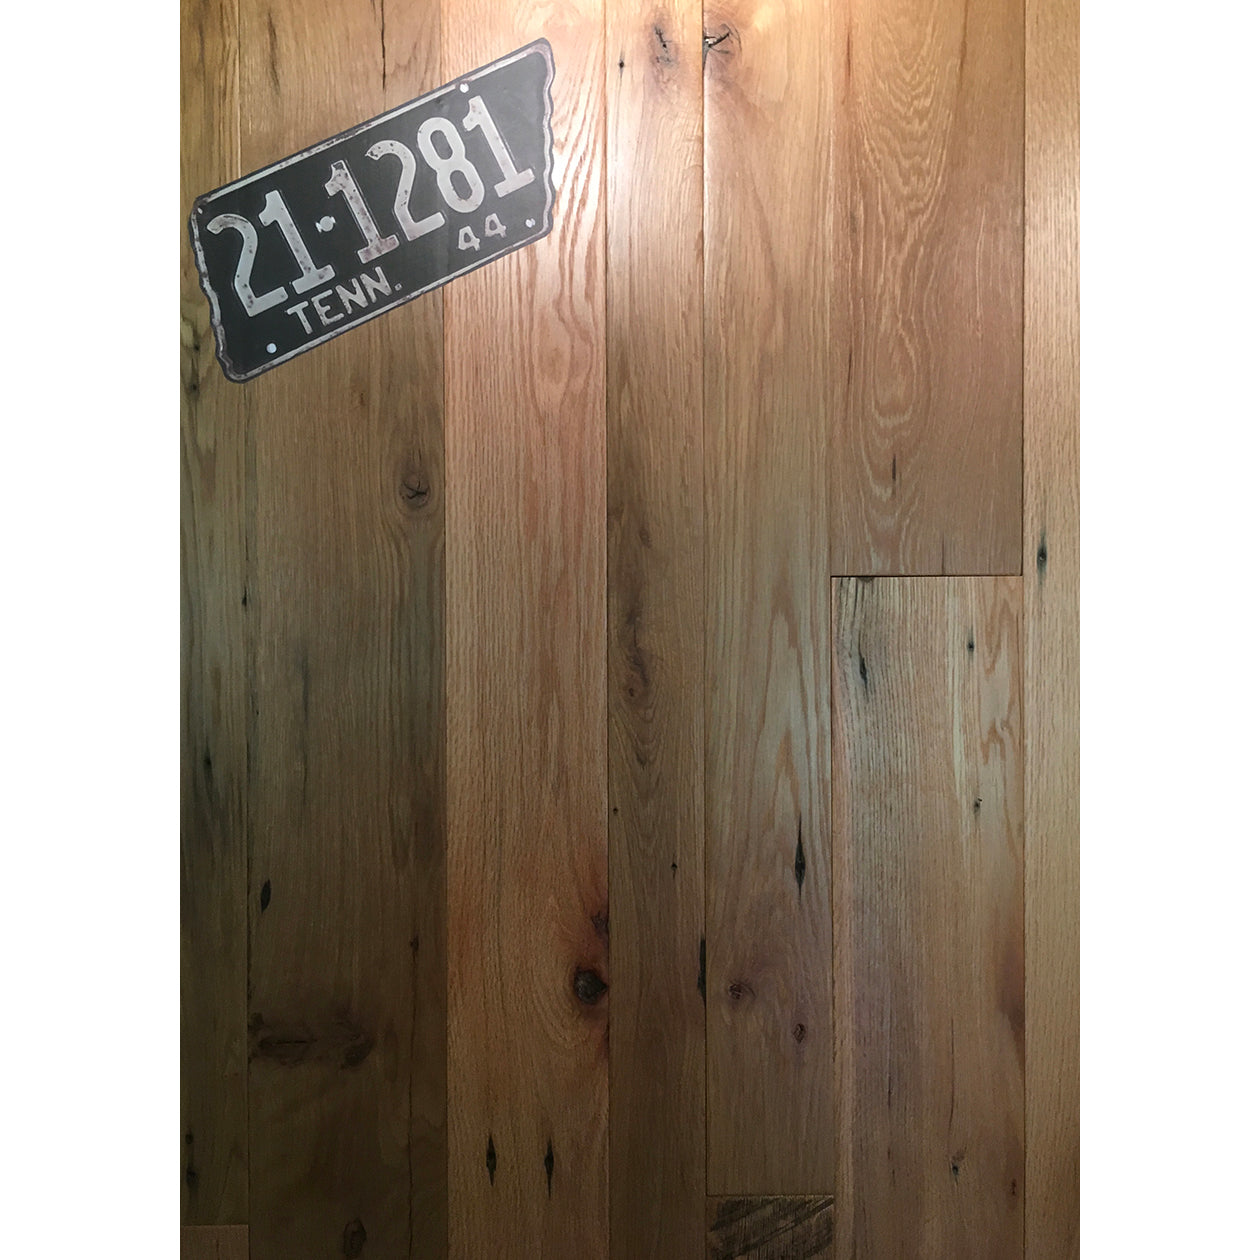 Tennessee Wood Flooring - Reclaimed - Cantilever Plank